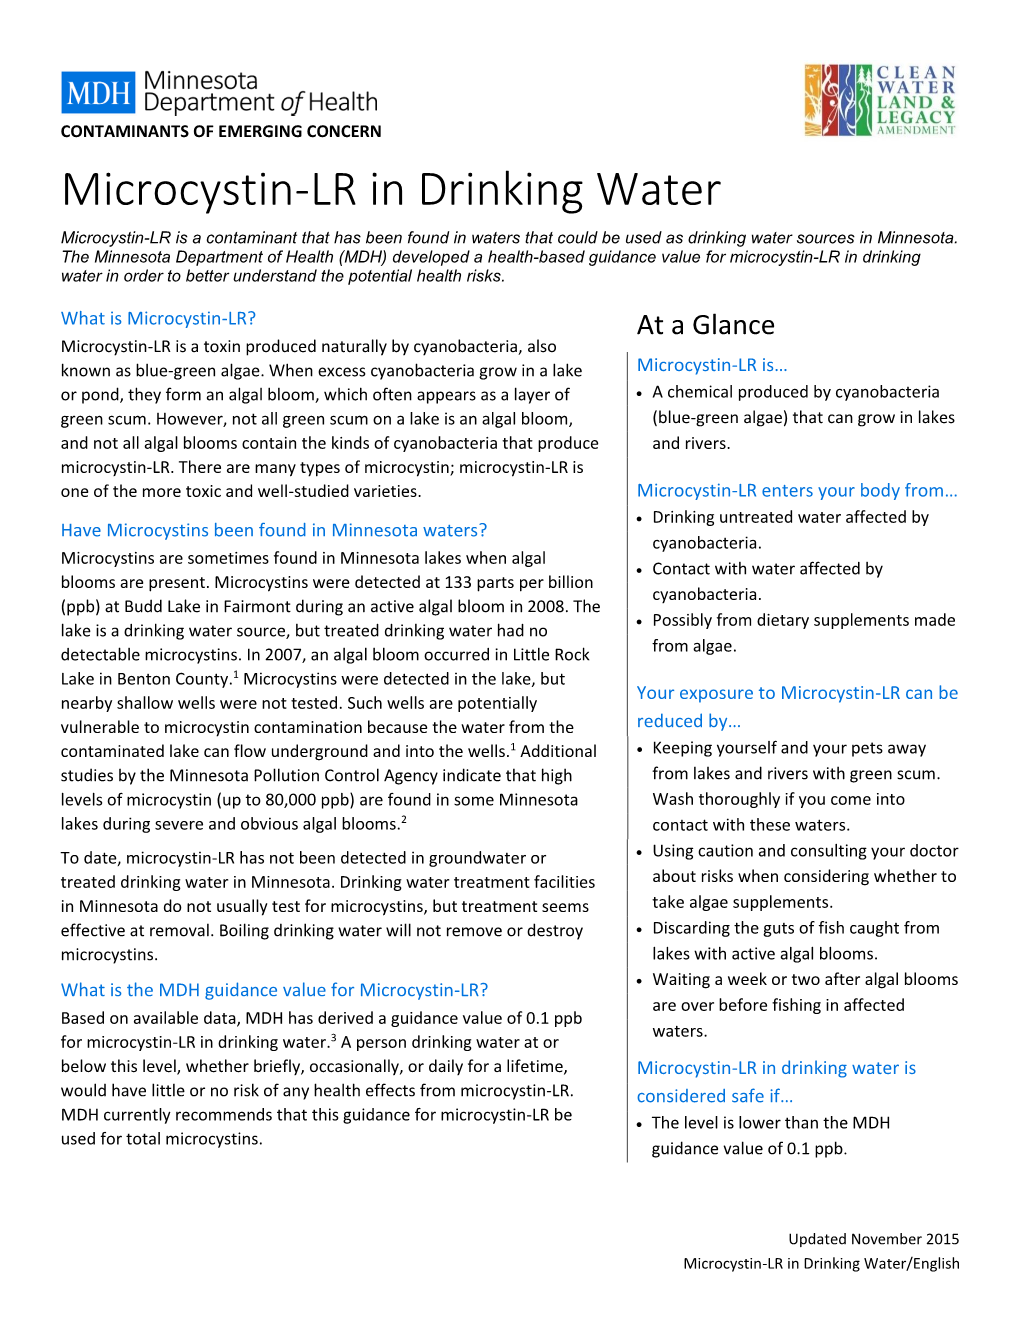 Microcystin-LR in Drinking Water Microcystin-LR Is a Contaminant That Has Been Found in Waters That Could Be Used As Drinking Water Sources in Minnesota